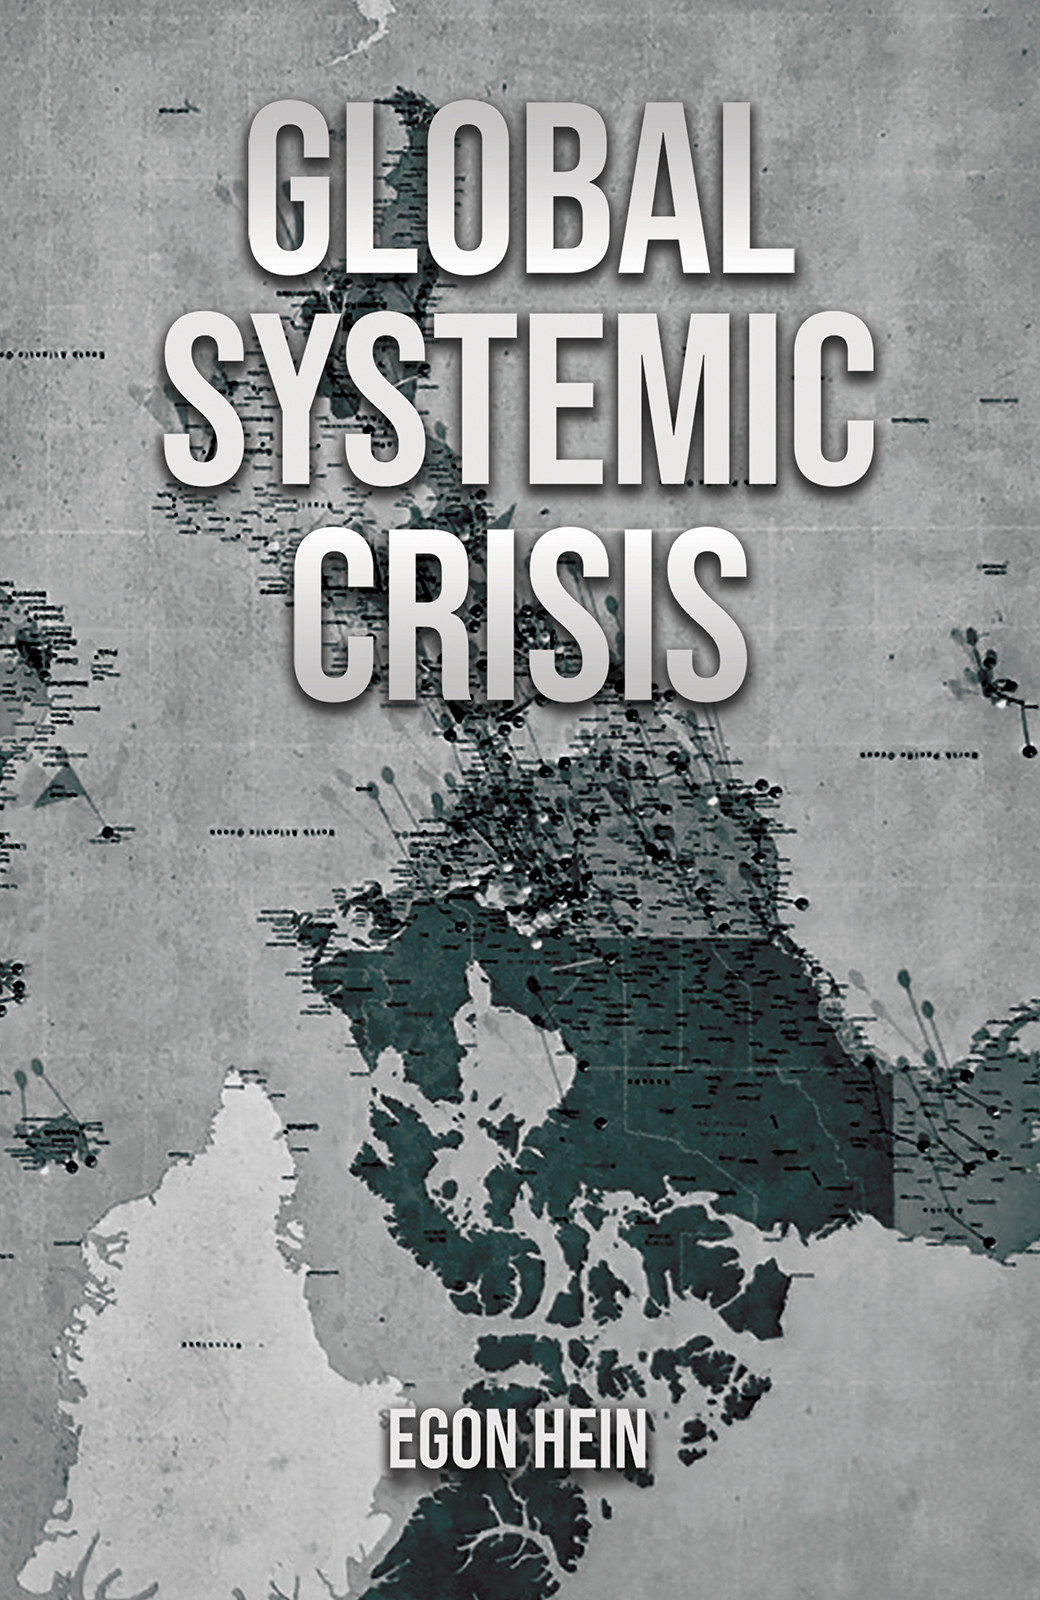 Global Systemic Crisis